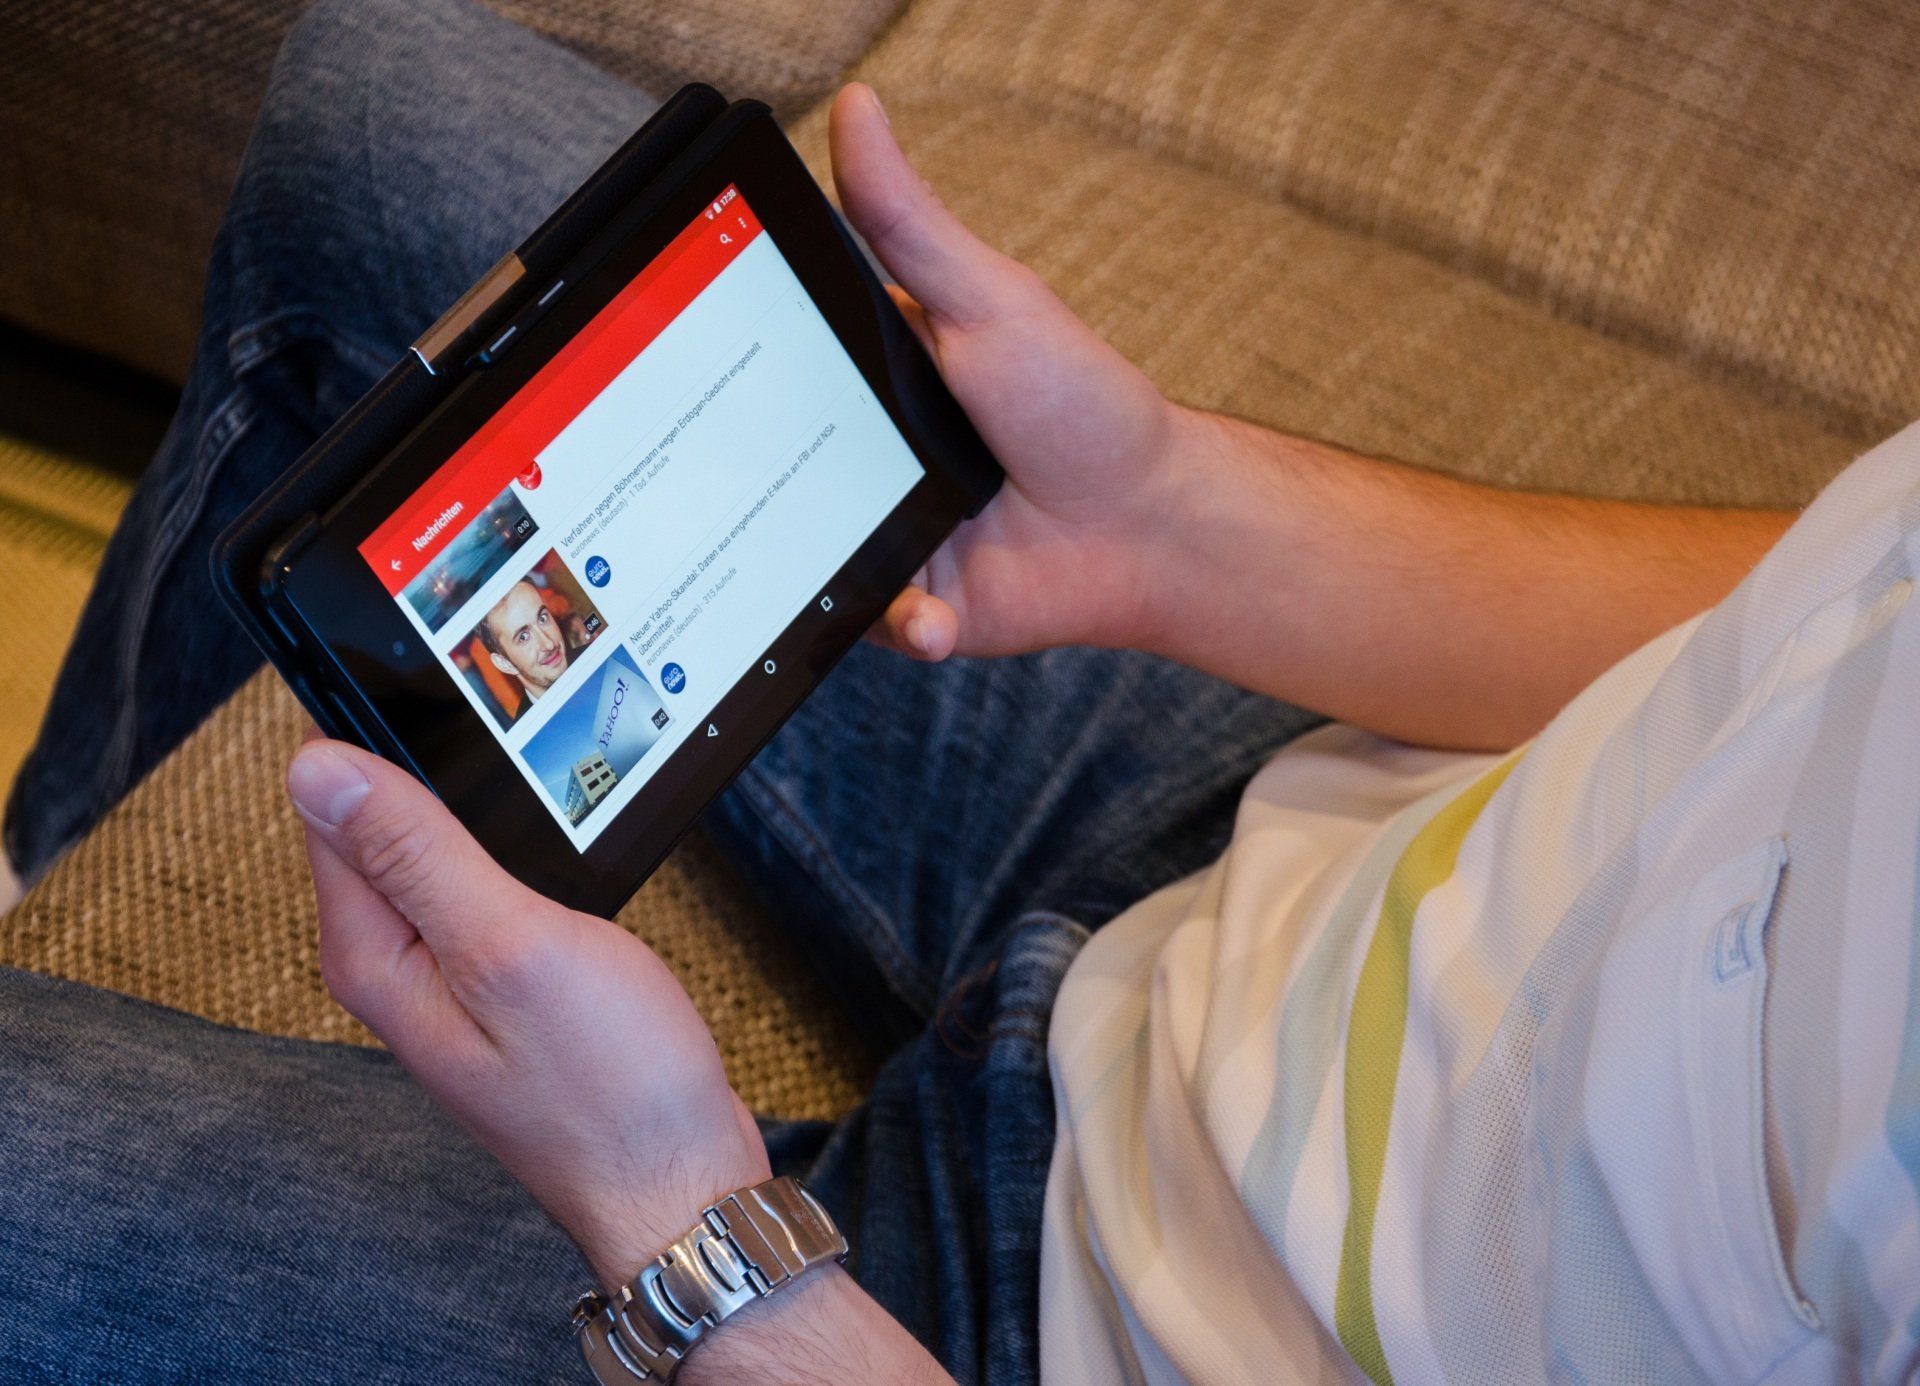 A person is sitting on a couch using a tablet